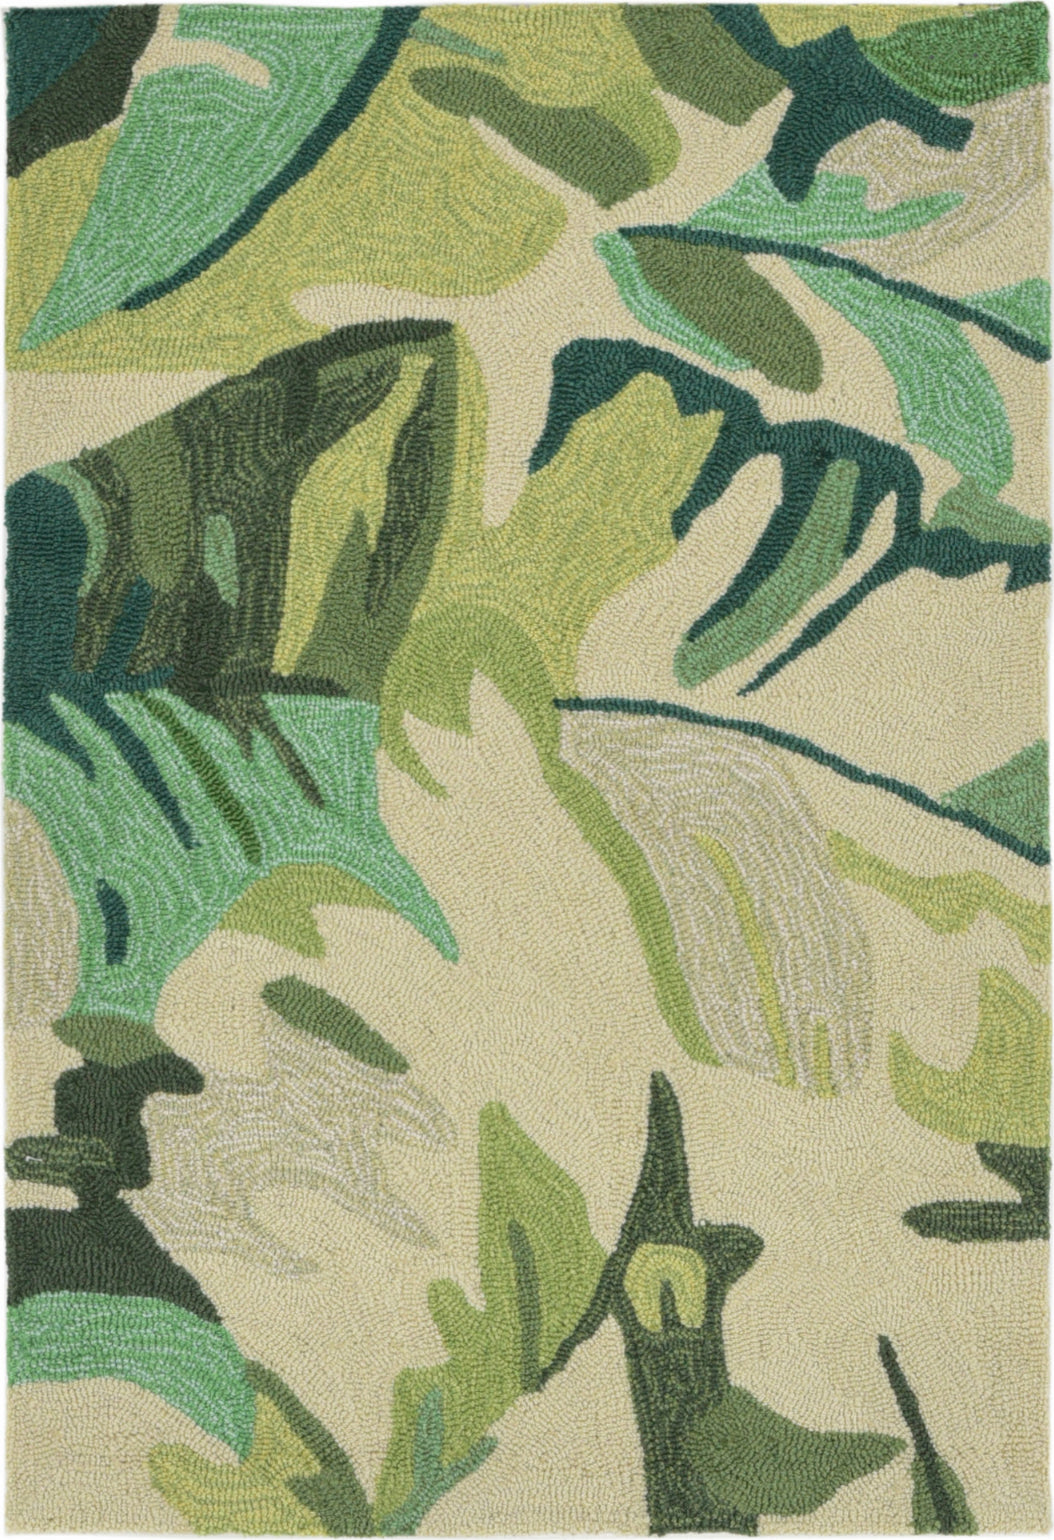 Capri Palm Leaf Tropical Indoor Outdoor Rugs by Liora Manne